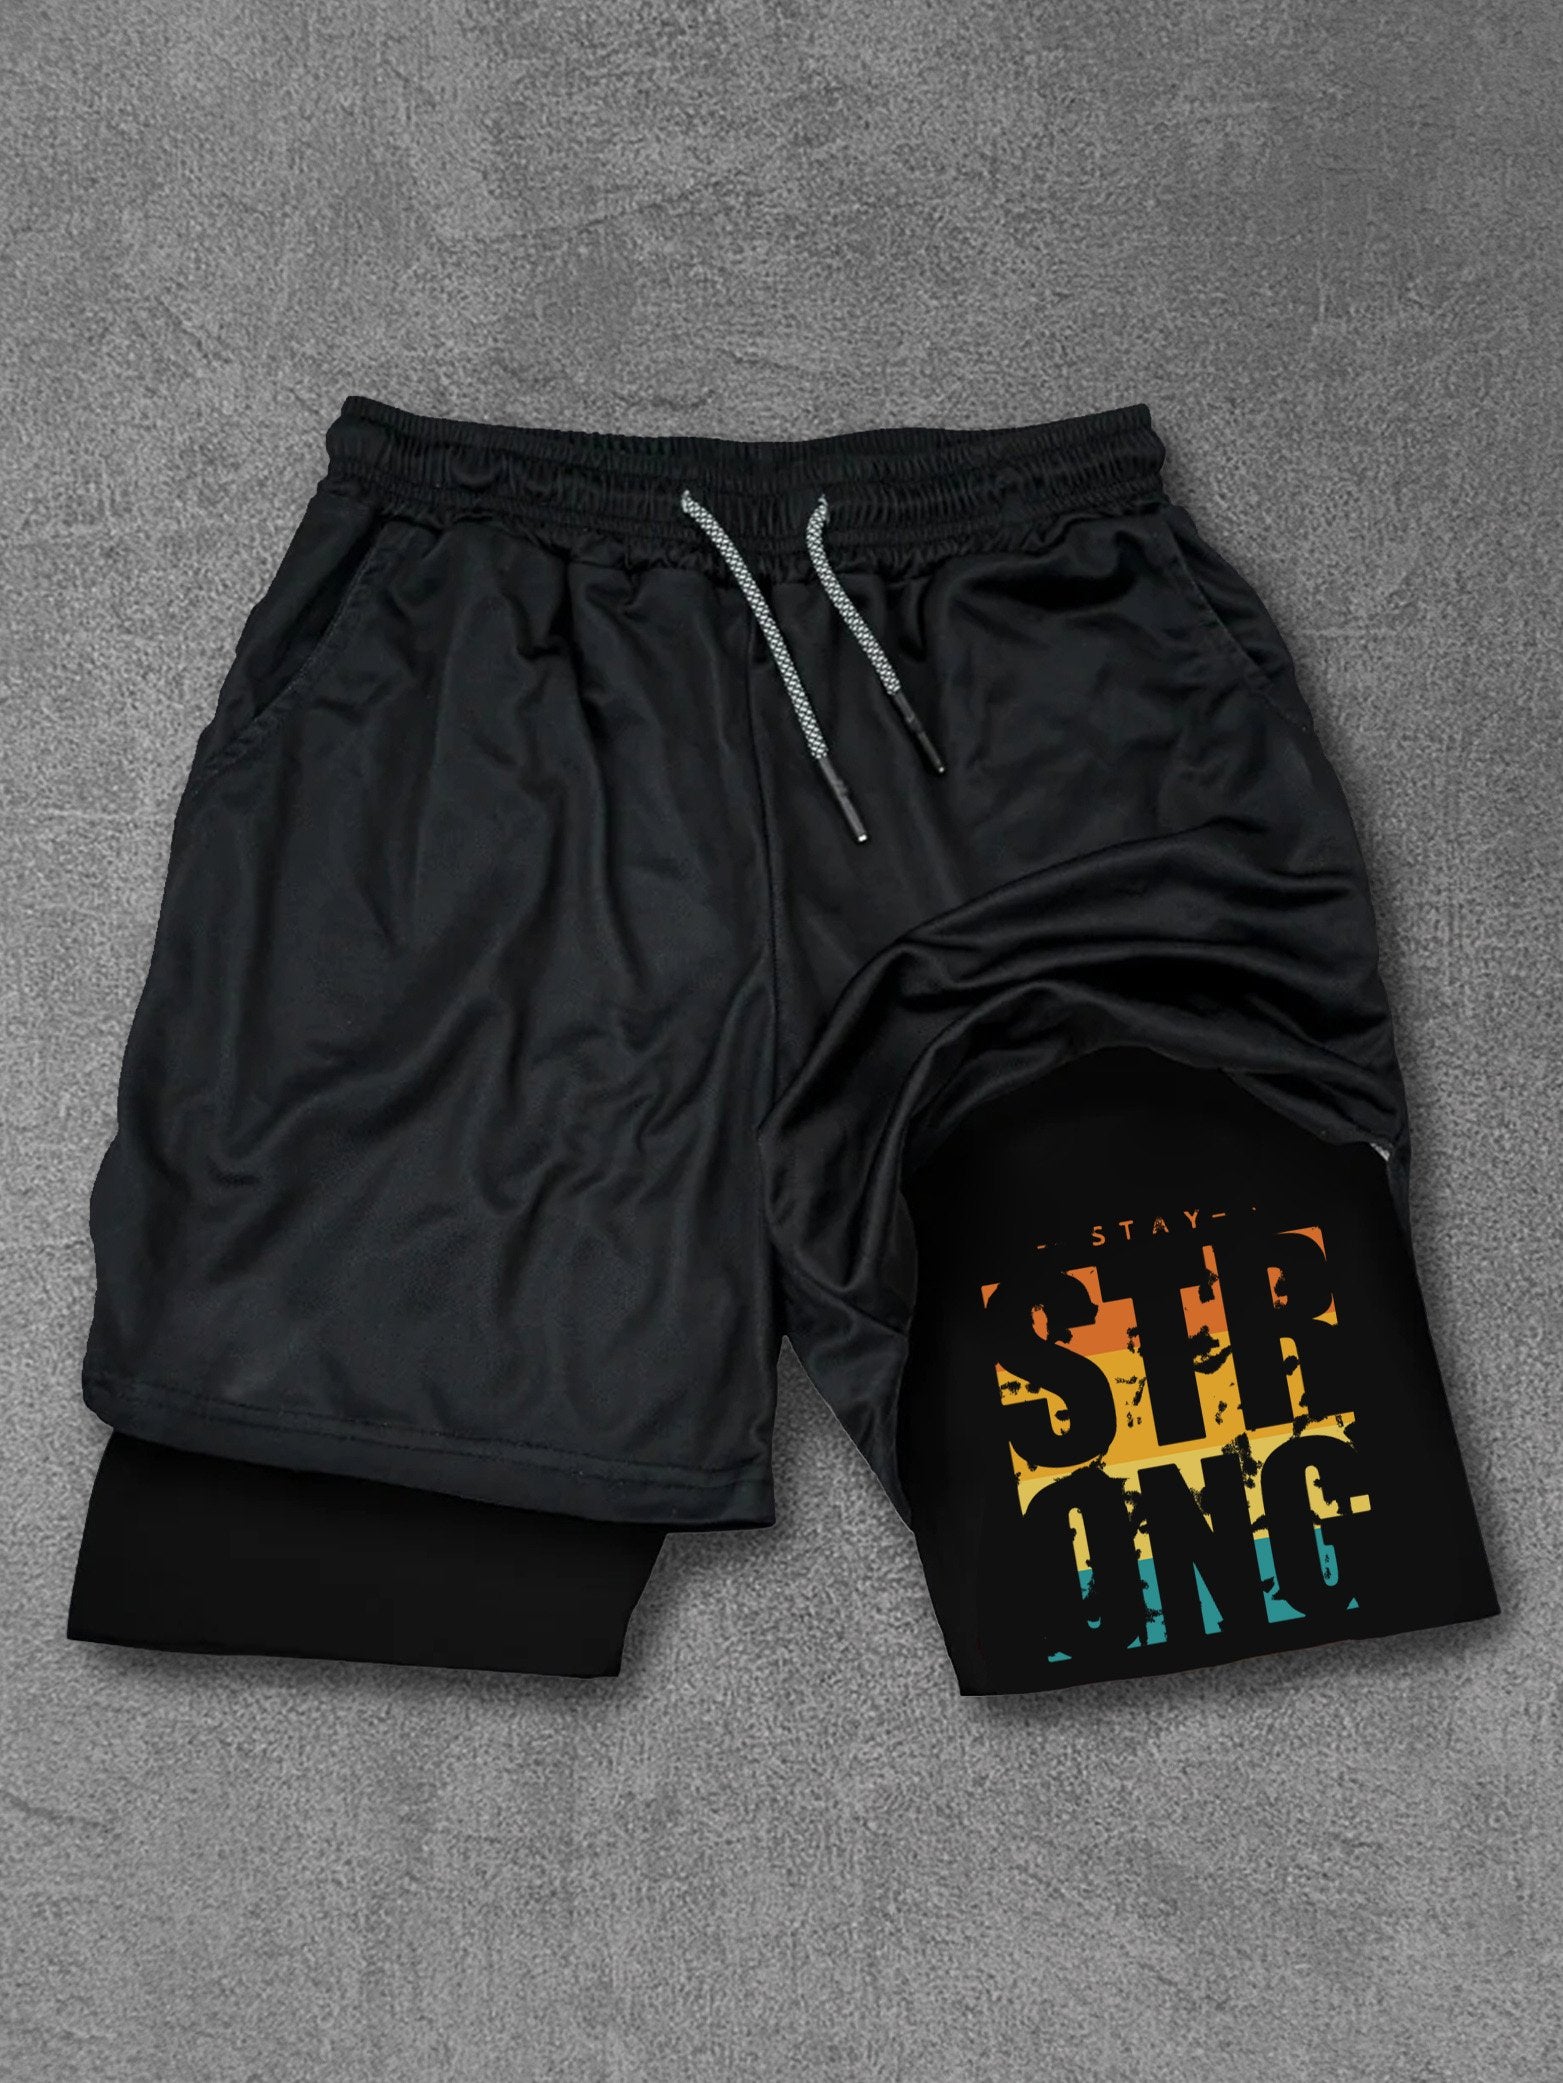 stay strong Performance Training Shorts